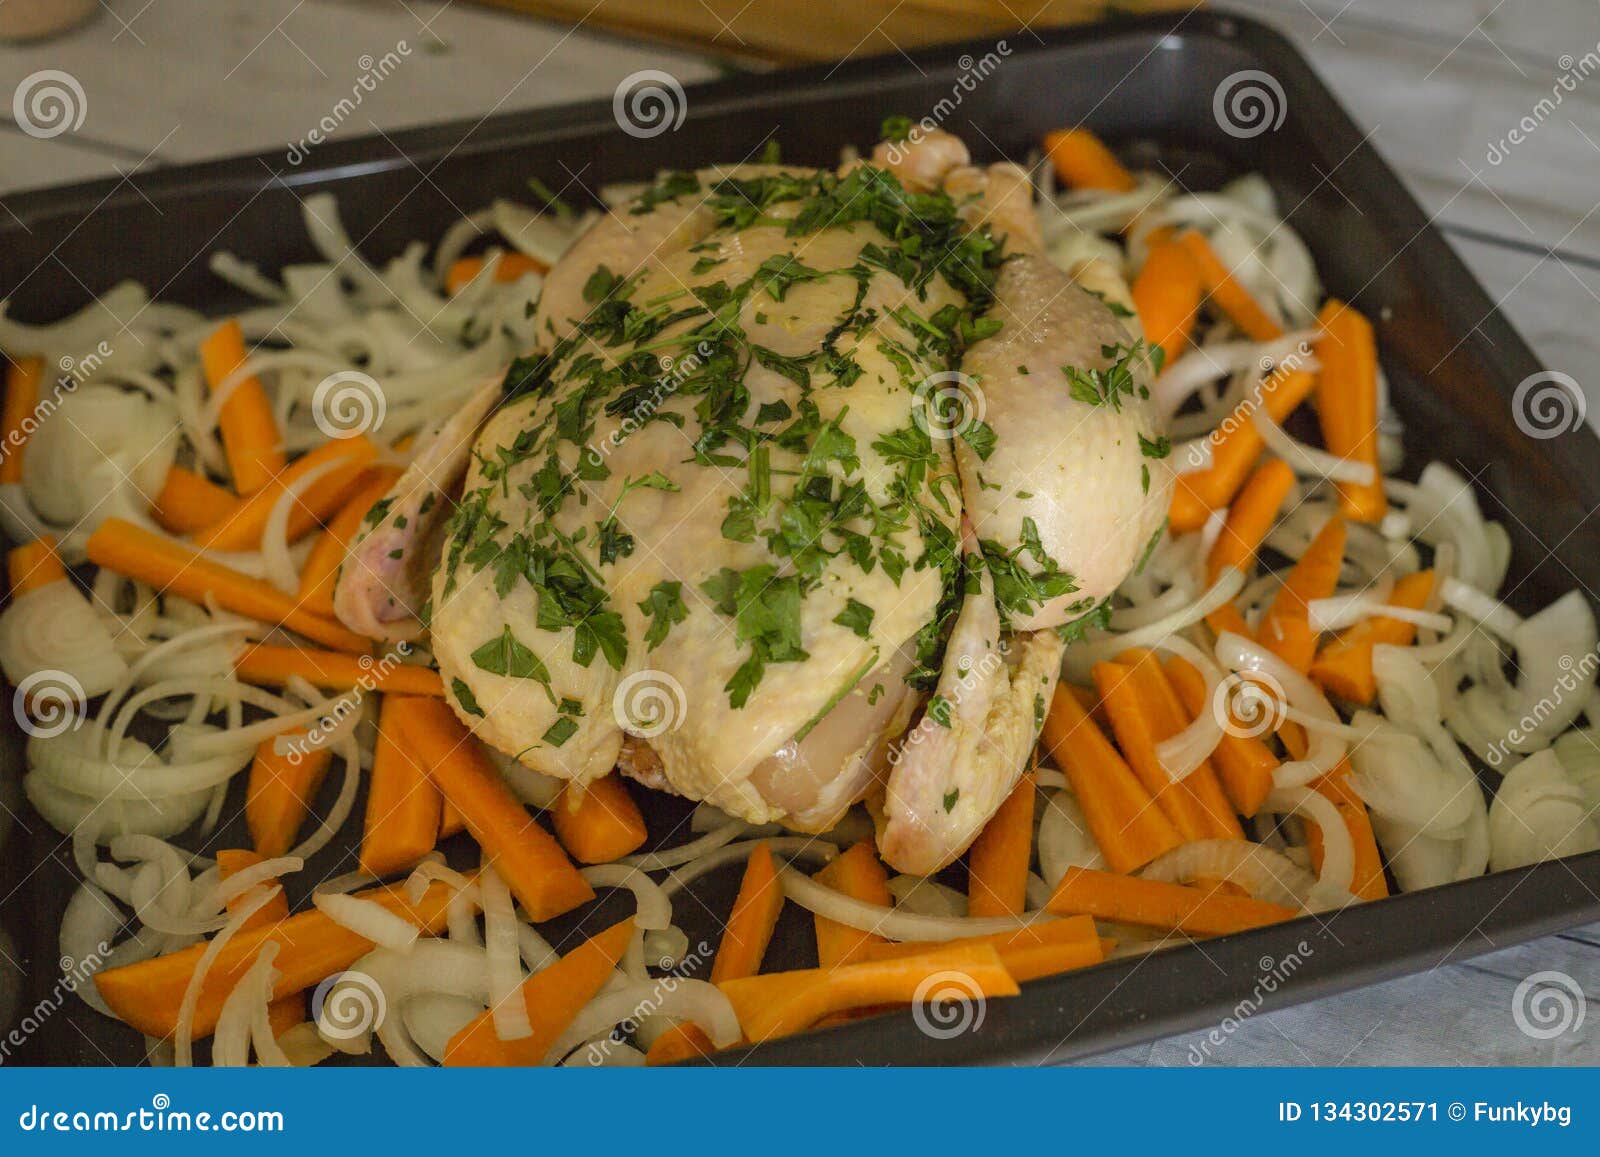 Female Hands Rubbing Pieces Of Parsley On Raw Chicken ...